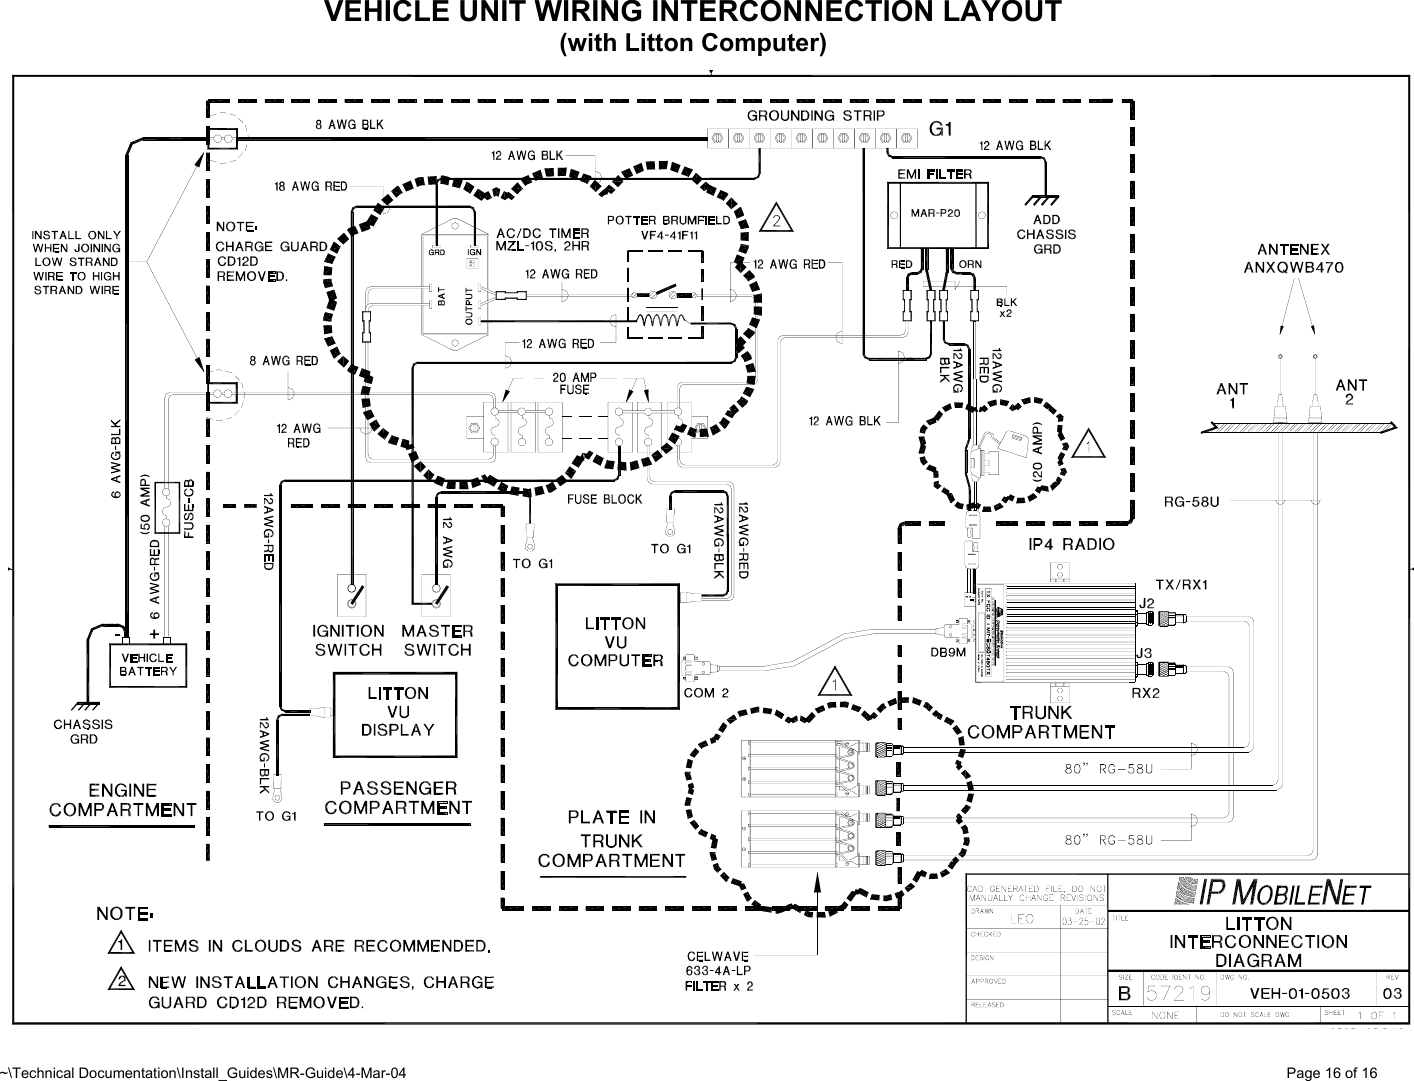 ~\Technical Documentation\Install_Guides\MR-Guide\4-Mar-04   Page 16 of 16 VEHICLE UNIT WIRING INTERCONNECTION LAYOUT (with Litton Computer)          